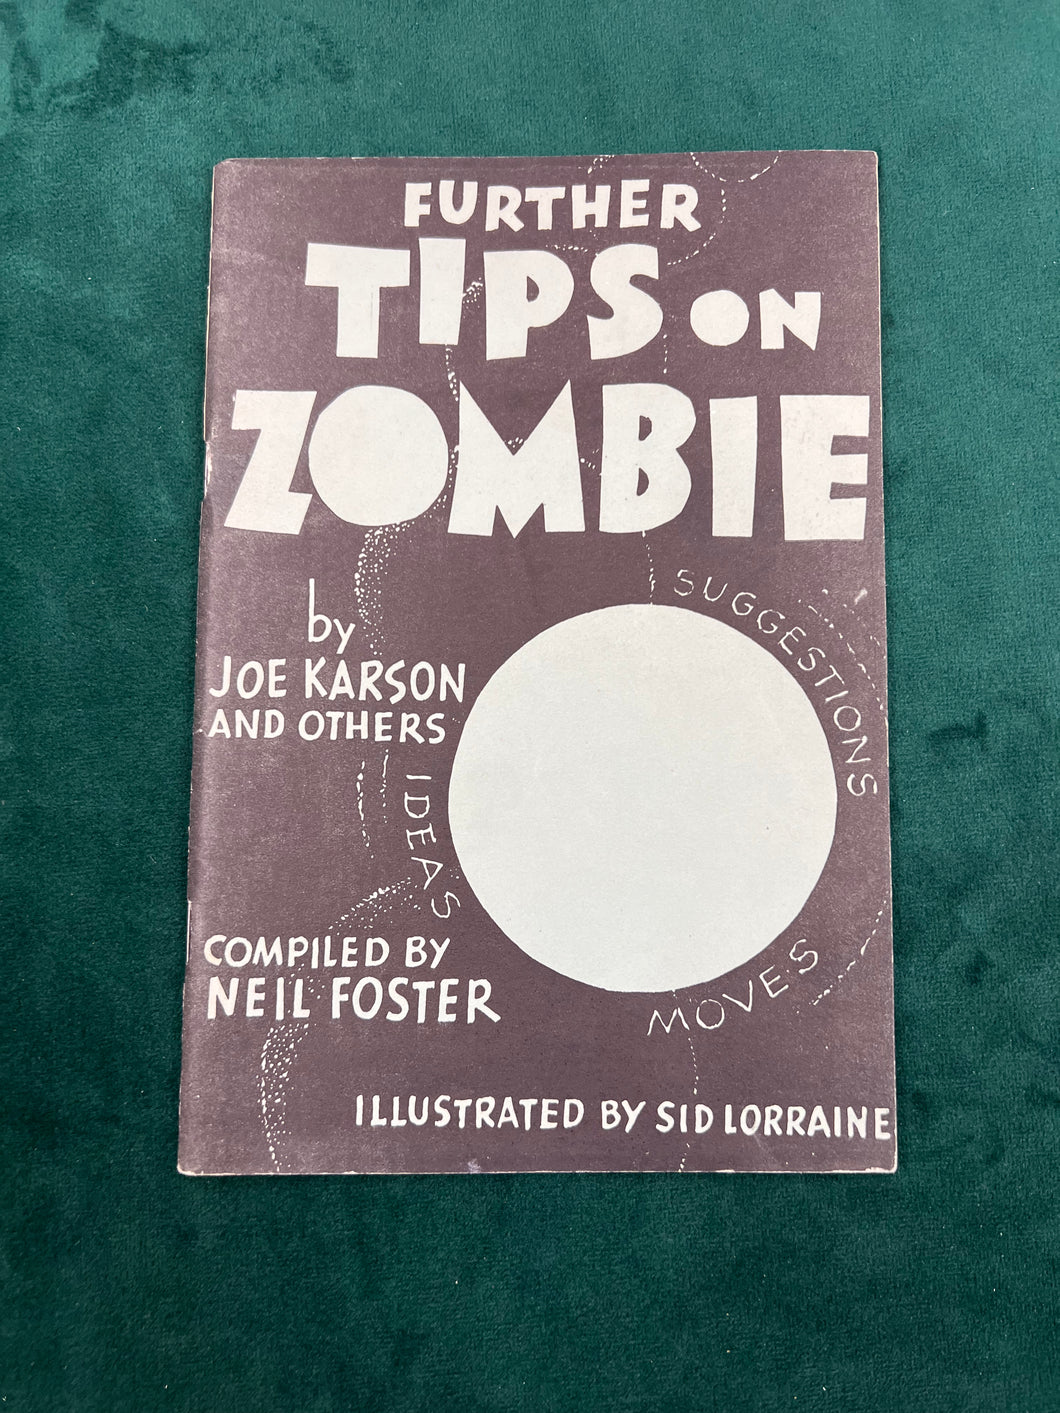 Further Tips on Zombie by Joe Karson